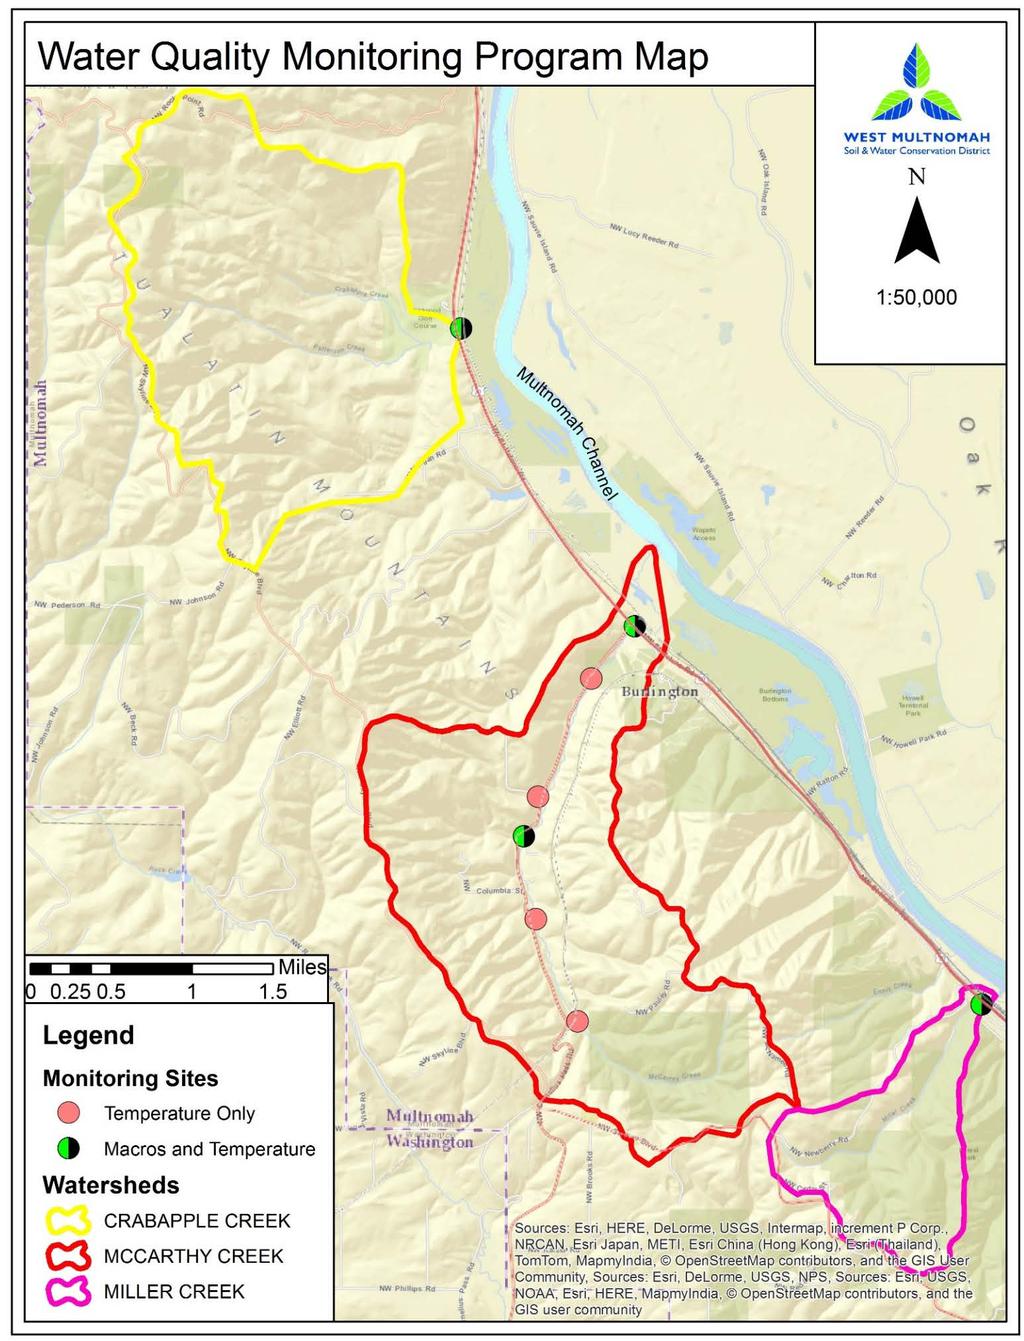 Figure: Map of monitoring locations within the WMSWCD Water